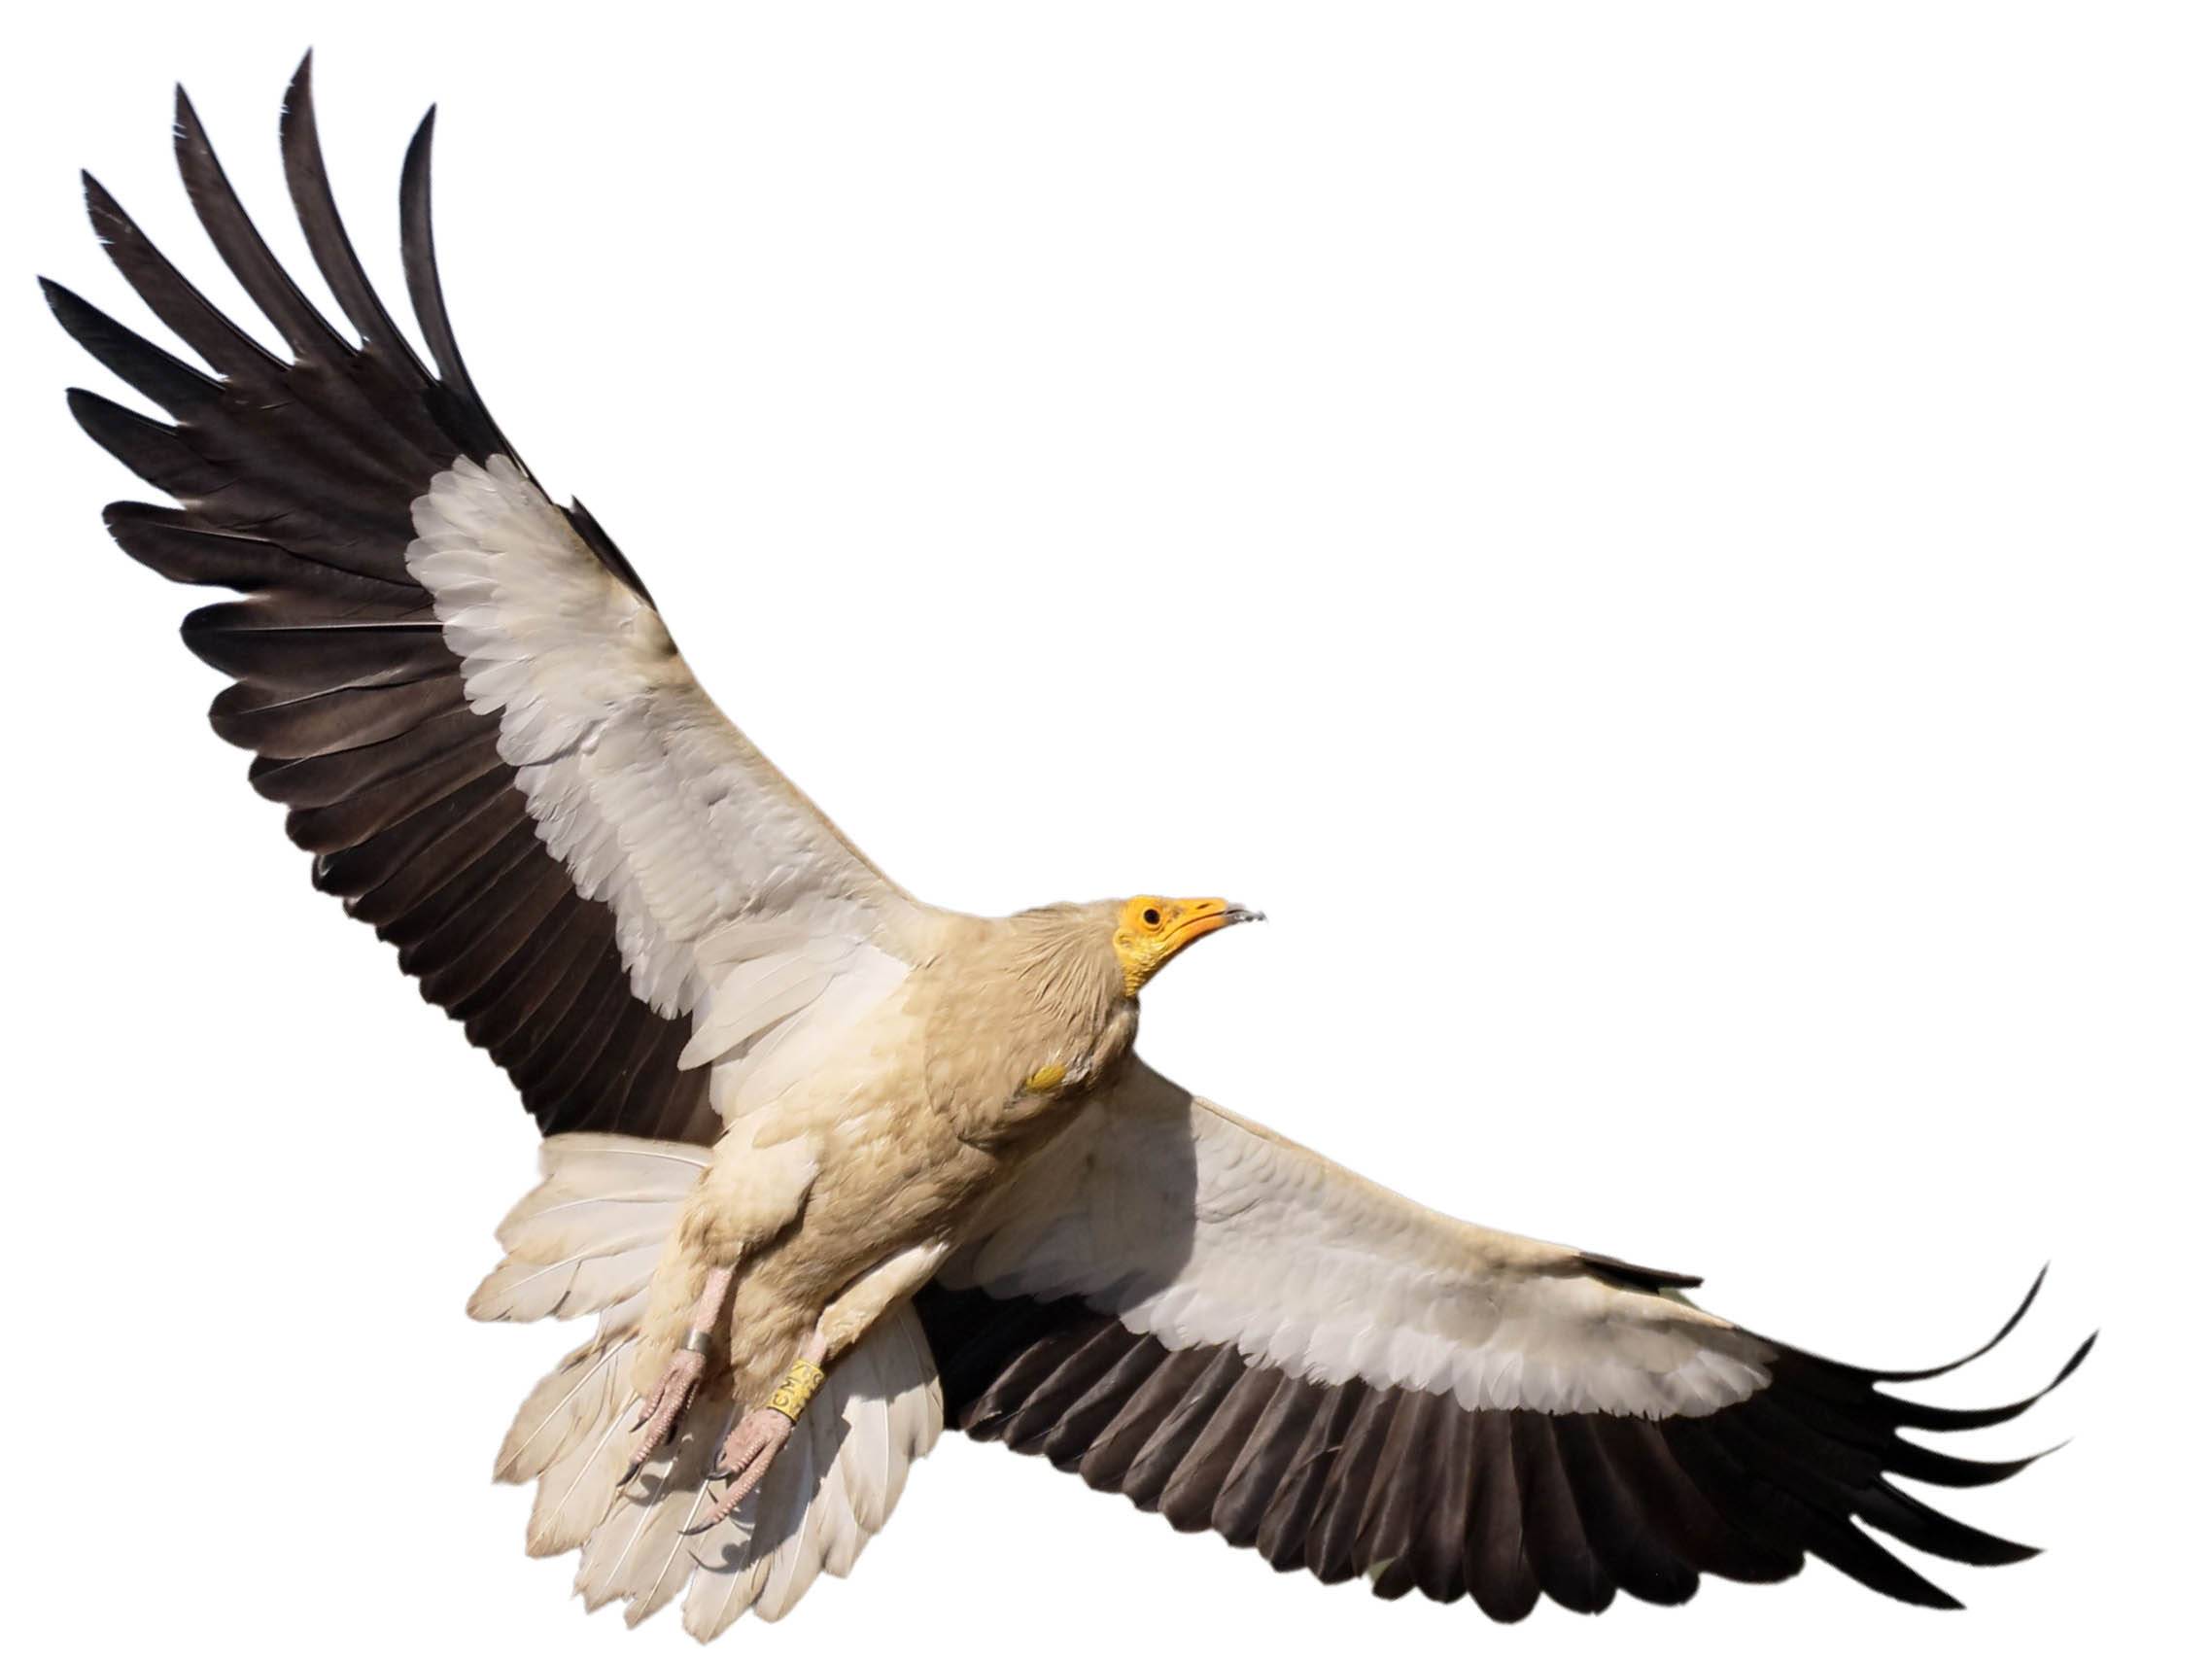 A photo of a Egyptian Vulture (Neophron percnopterus)